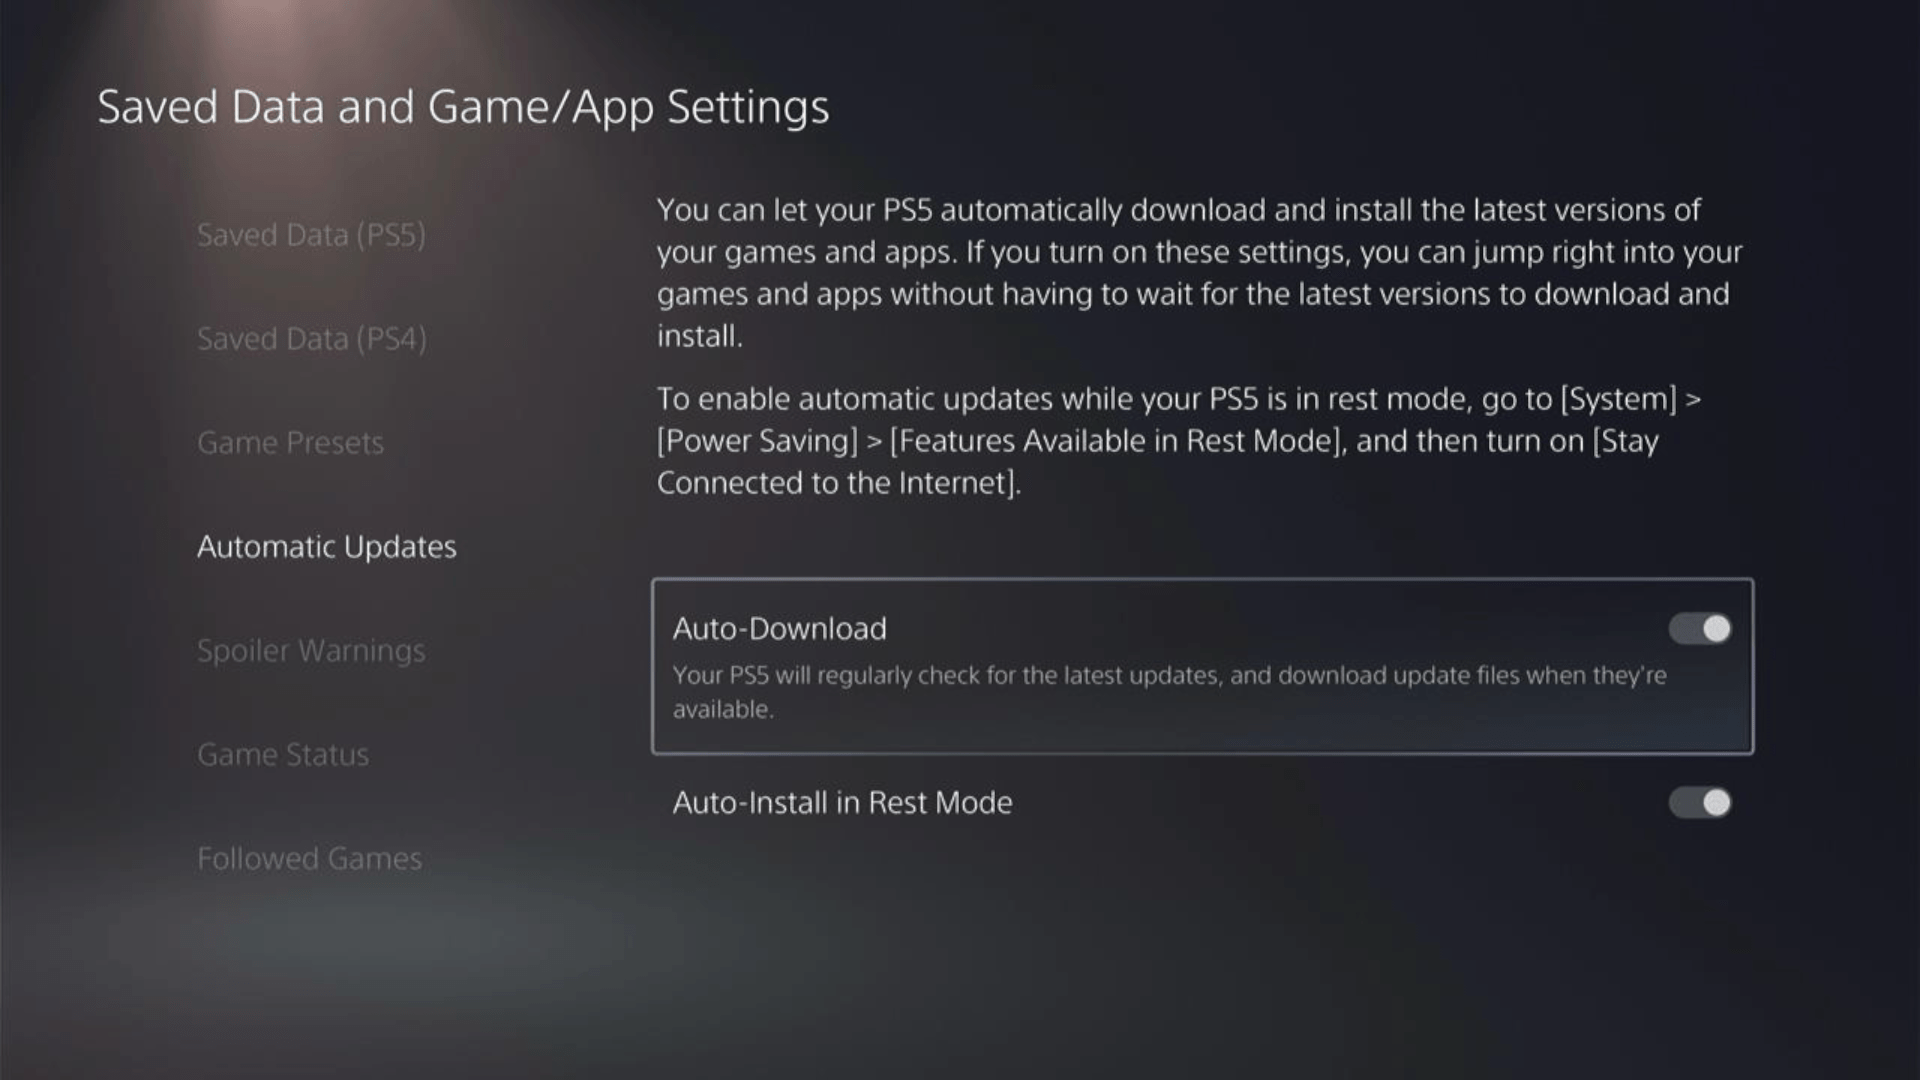 In the Saved Data and Game/App Settings window, select Automatic Updates from the left sidebar to enable automatic game updates to avoid frozen Loading Screen